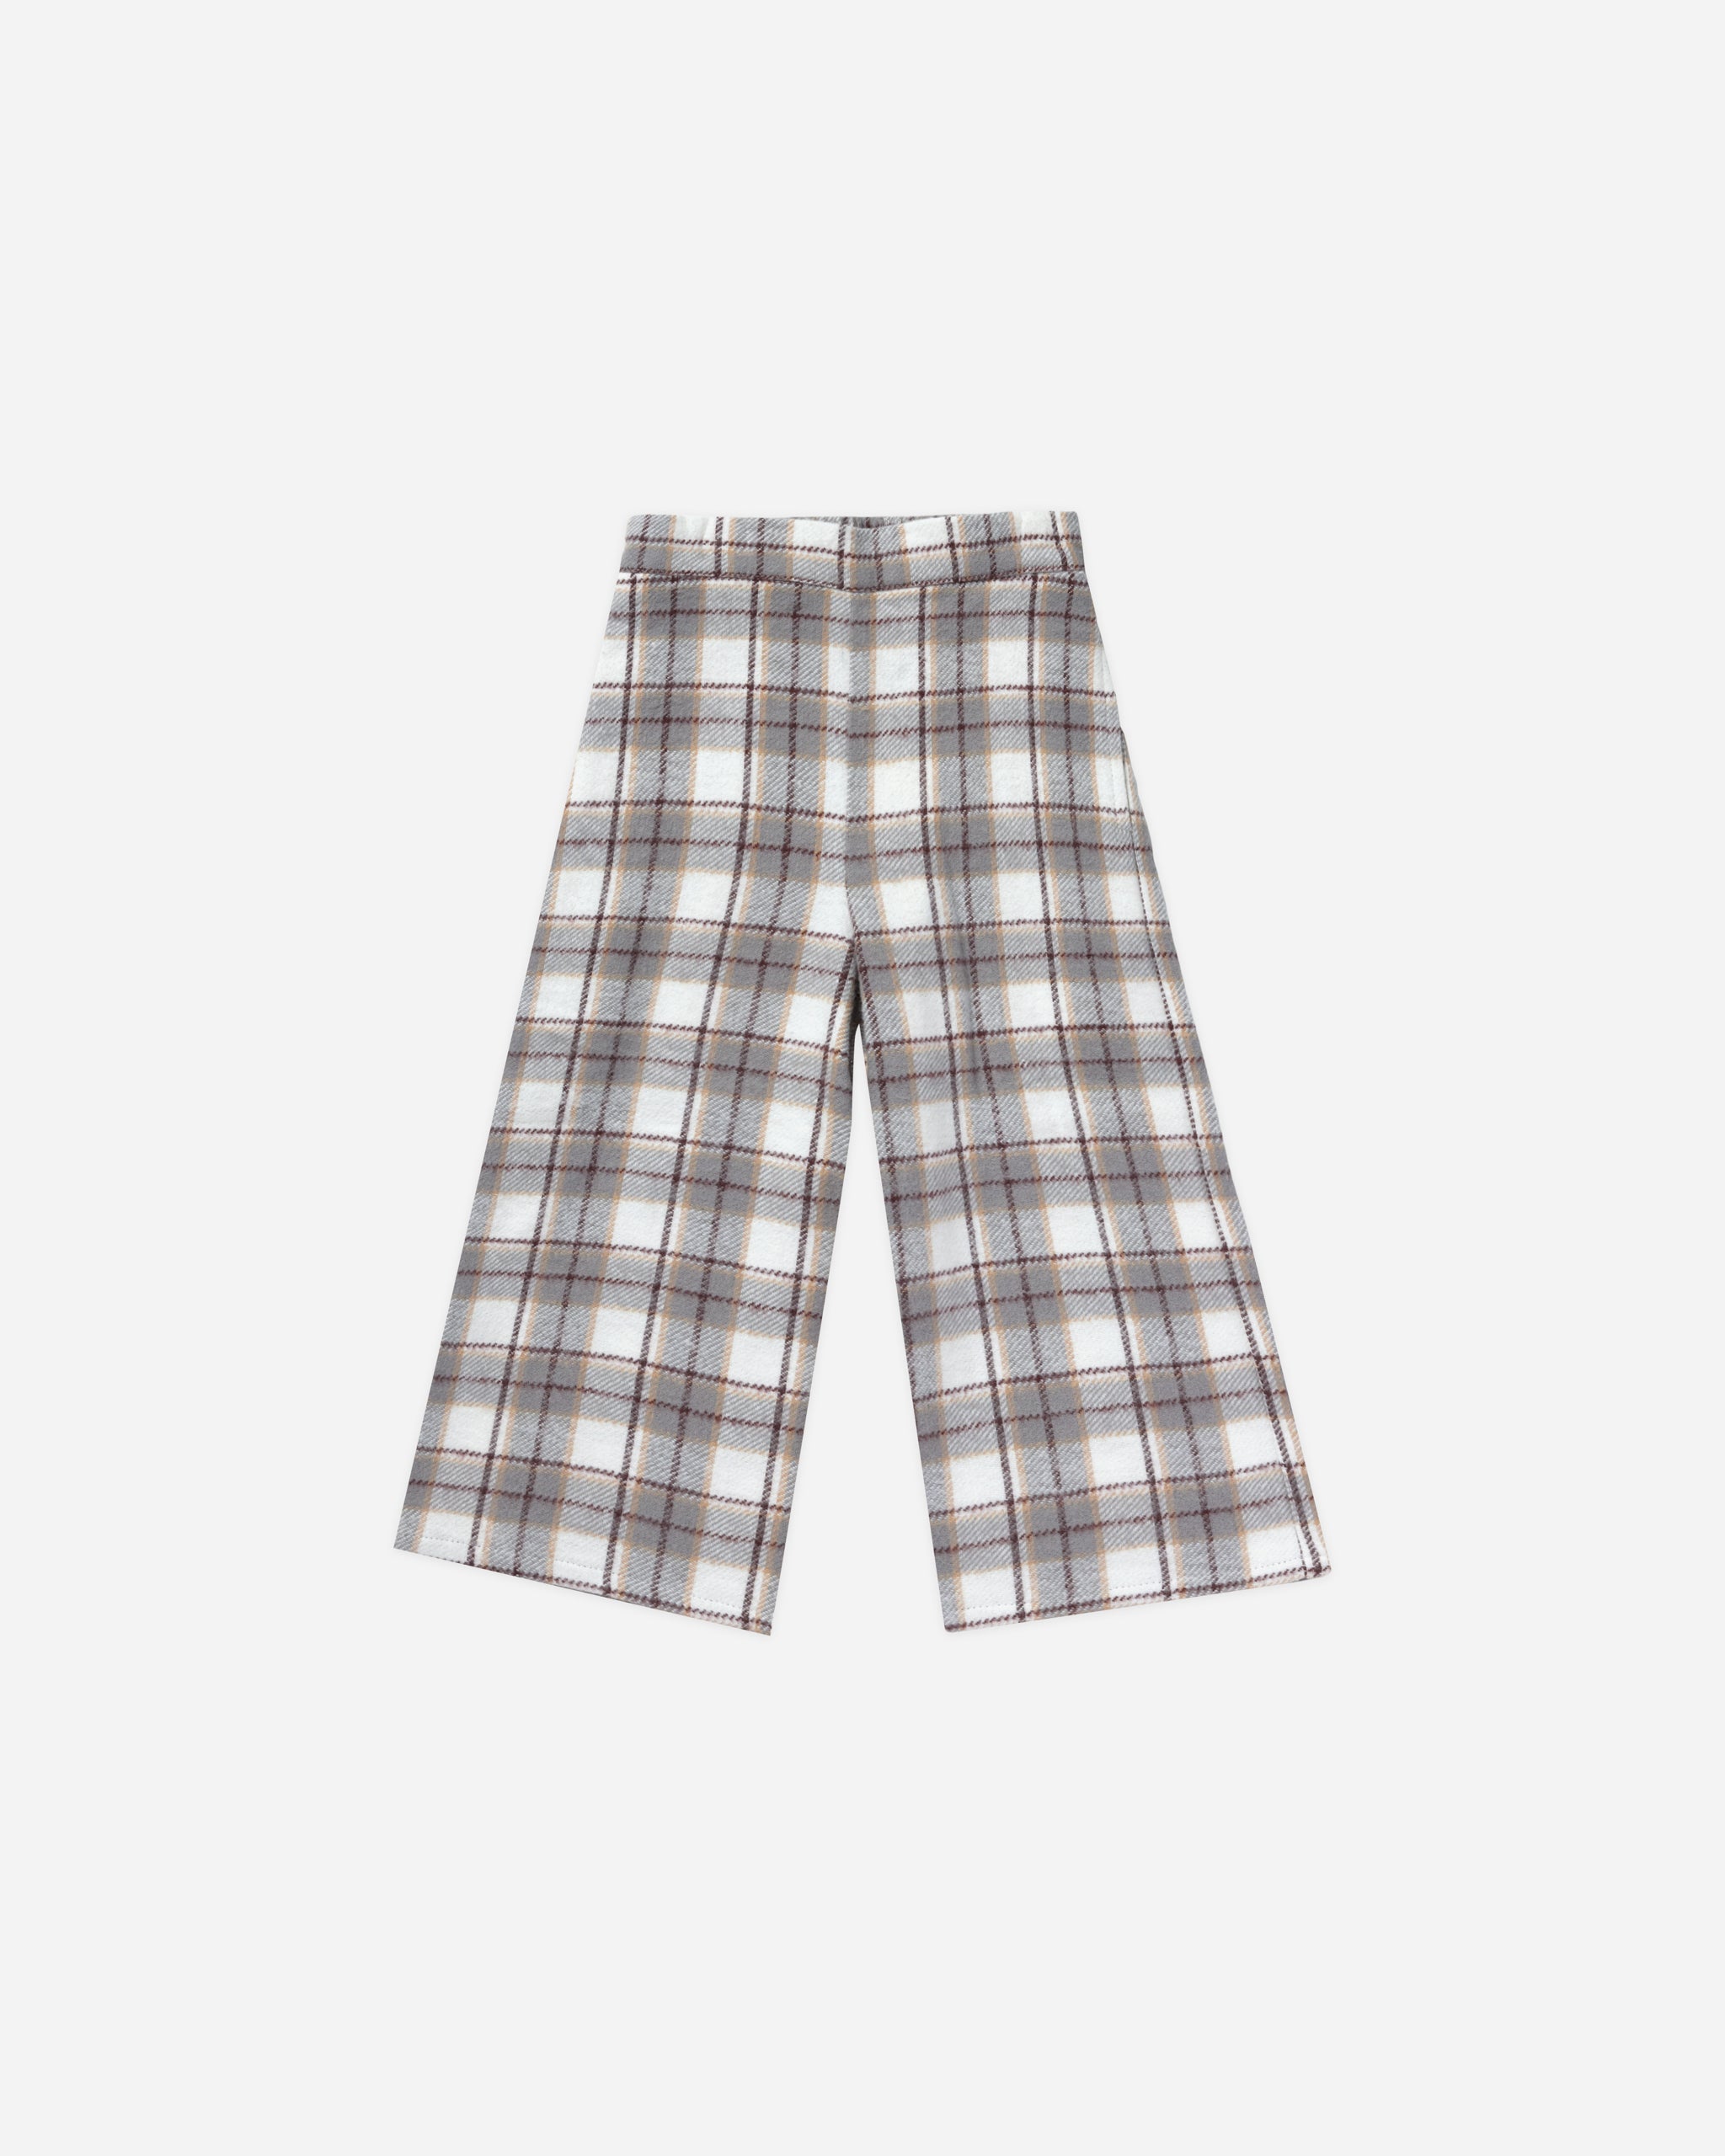 Logan Pant || Blue Flannel - Rylee + Cru | Kids Clothes | Trendy Baby Clothes | Modern Infant Outfits |